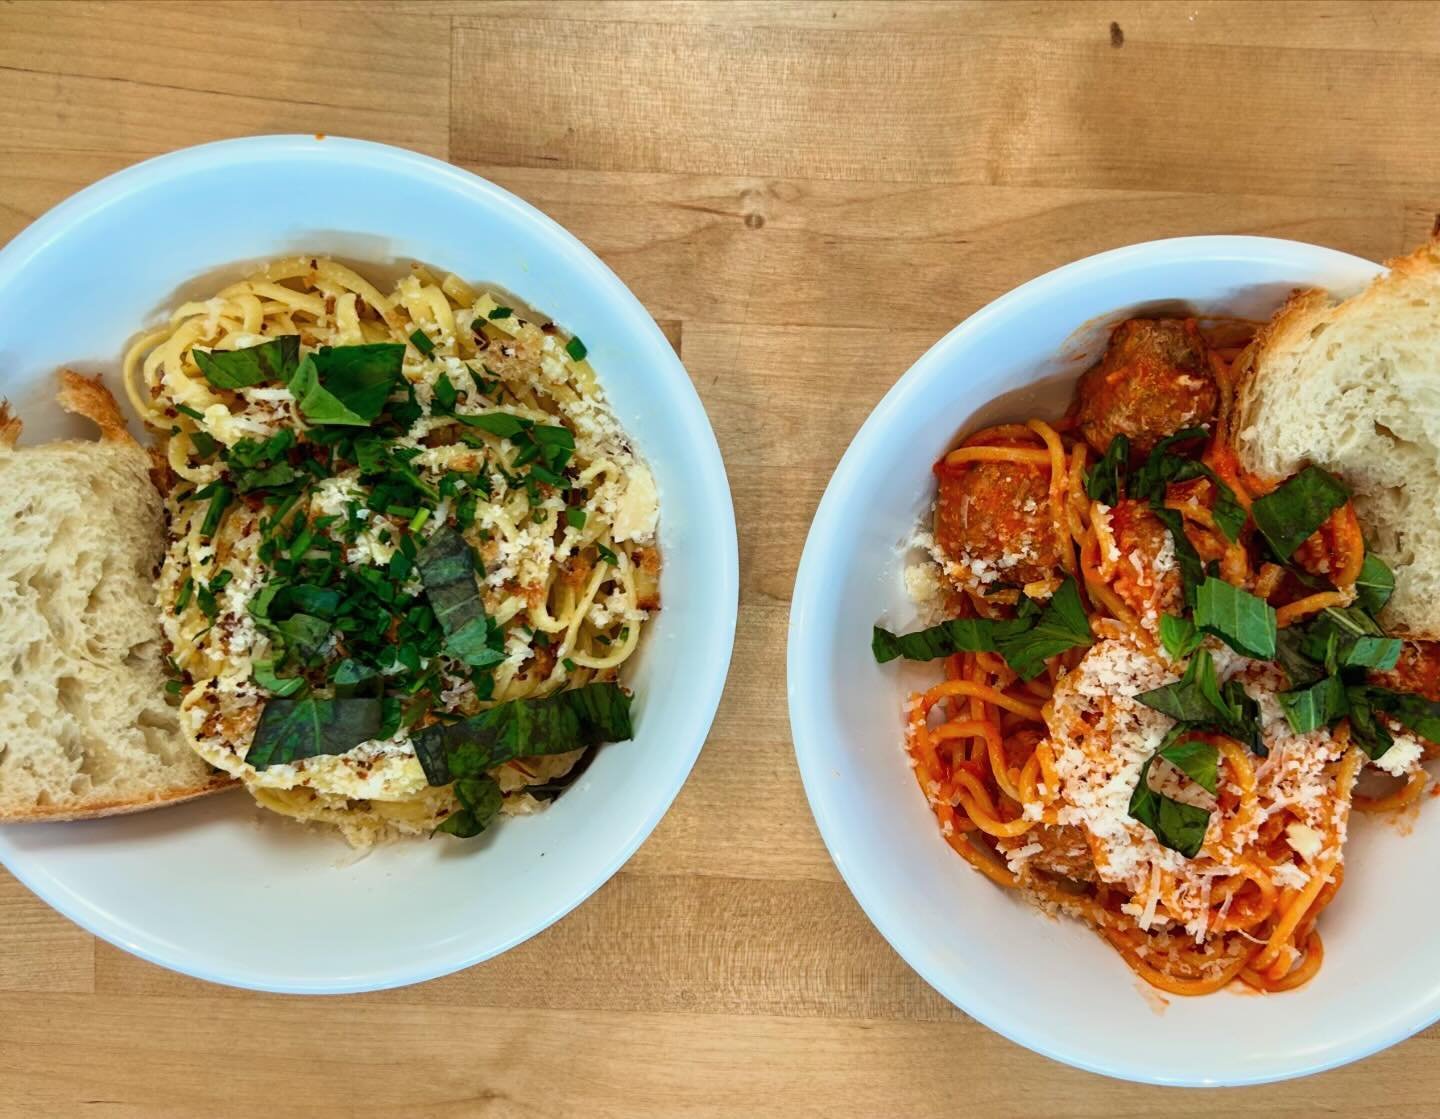 It&rsquo;s supper time, y&rsquo;all. Spaghetti and meatballs? We have it. Linguine? We have it. Gluten free pasta? We have that, too 😘 Served every day from 4-9pm at The Grove. See ya soon!